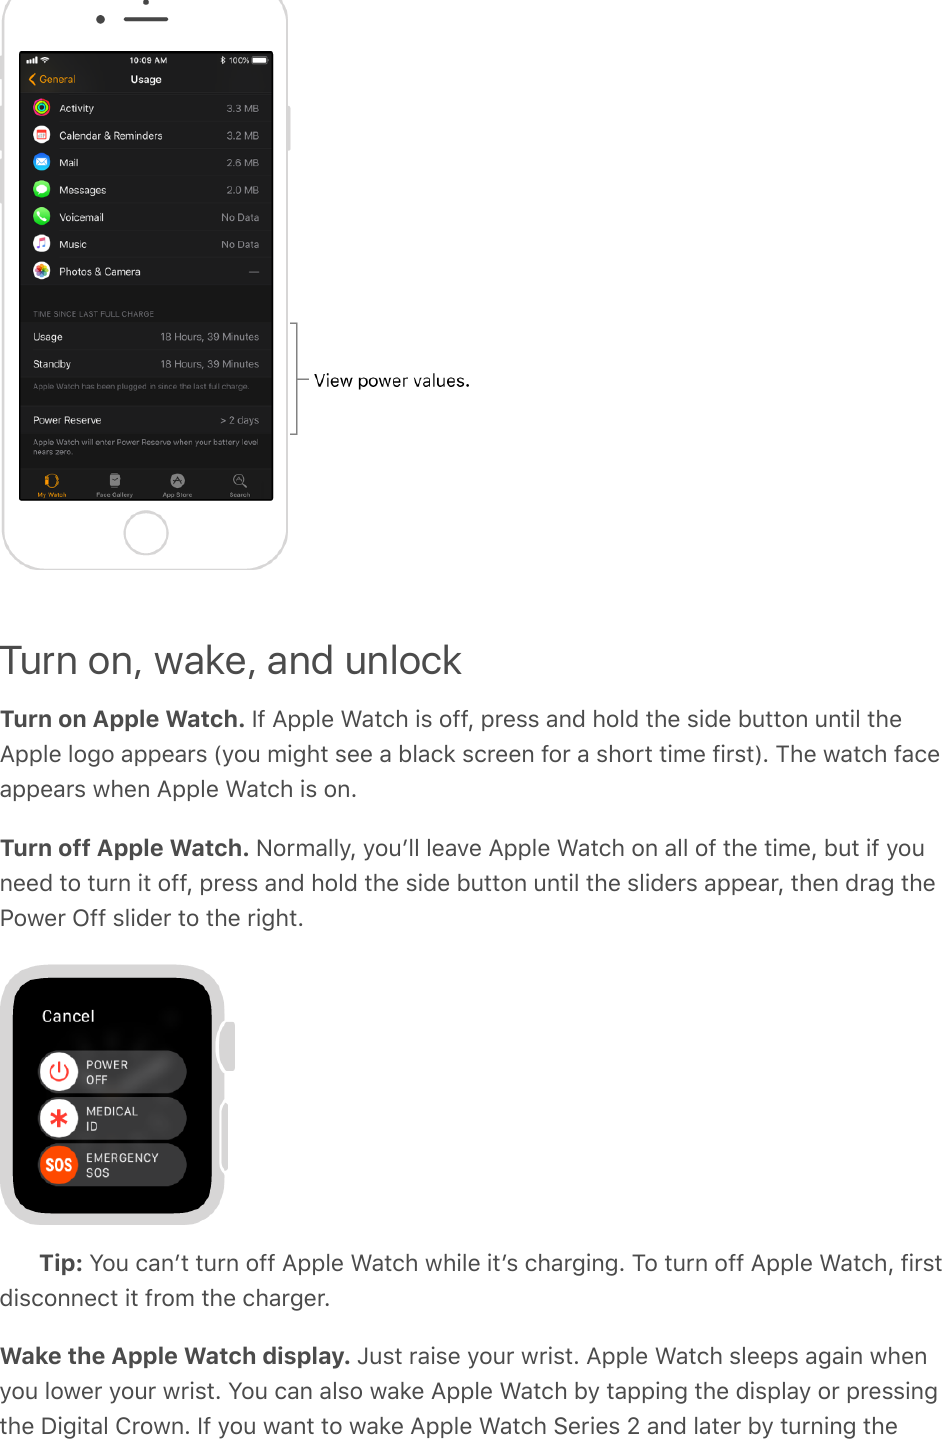 Turn on, wake, and unlockTurn on Apple Watch. If Apple Watch is off, press and hold the side button until theApple logo appears (you might see a black screen for a short time first). The watch faceappears when Apple Watch is on.Turn off Apple Watch. Normally, youʼll leave Apple Watch on all of the time, but if youneed to turn it off, press and hold the side button until the sliders appear, then drag thePower Off slider to the right.Tip: You canʼt turn off Apple Watch while itʼs charging. To turn off Apple Watch, firstdisconnect it from the charger.Wake the Apple Watch display. Just raise your wrist. Apple Watch sleeps again whenyou lower your wrist. You can also wake Apple Watch by tapping the display or pressingthe Digital Crown. If you want to wake Apple Watch Series 2 and later by turning the